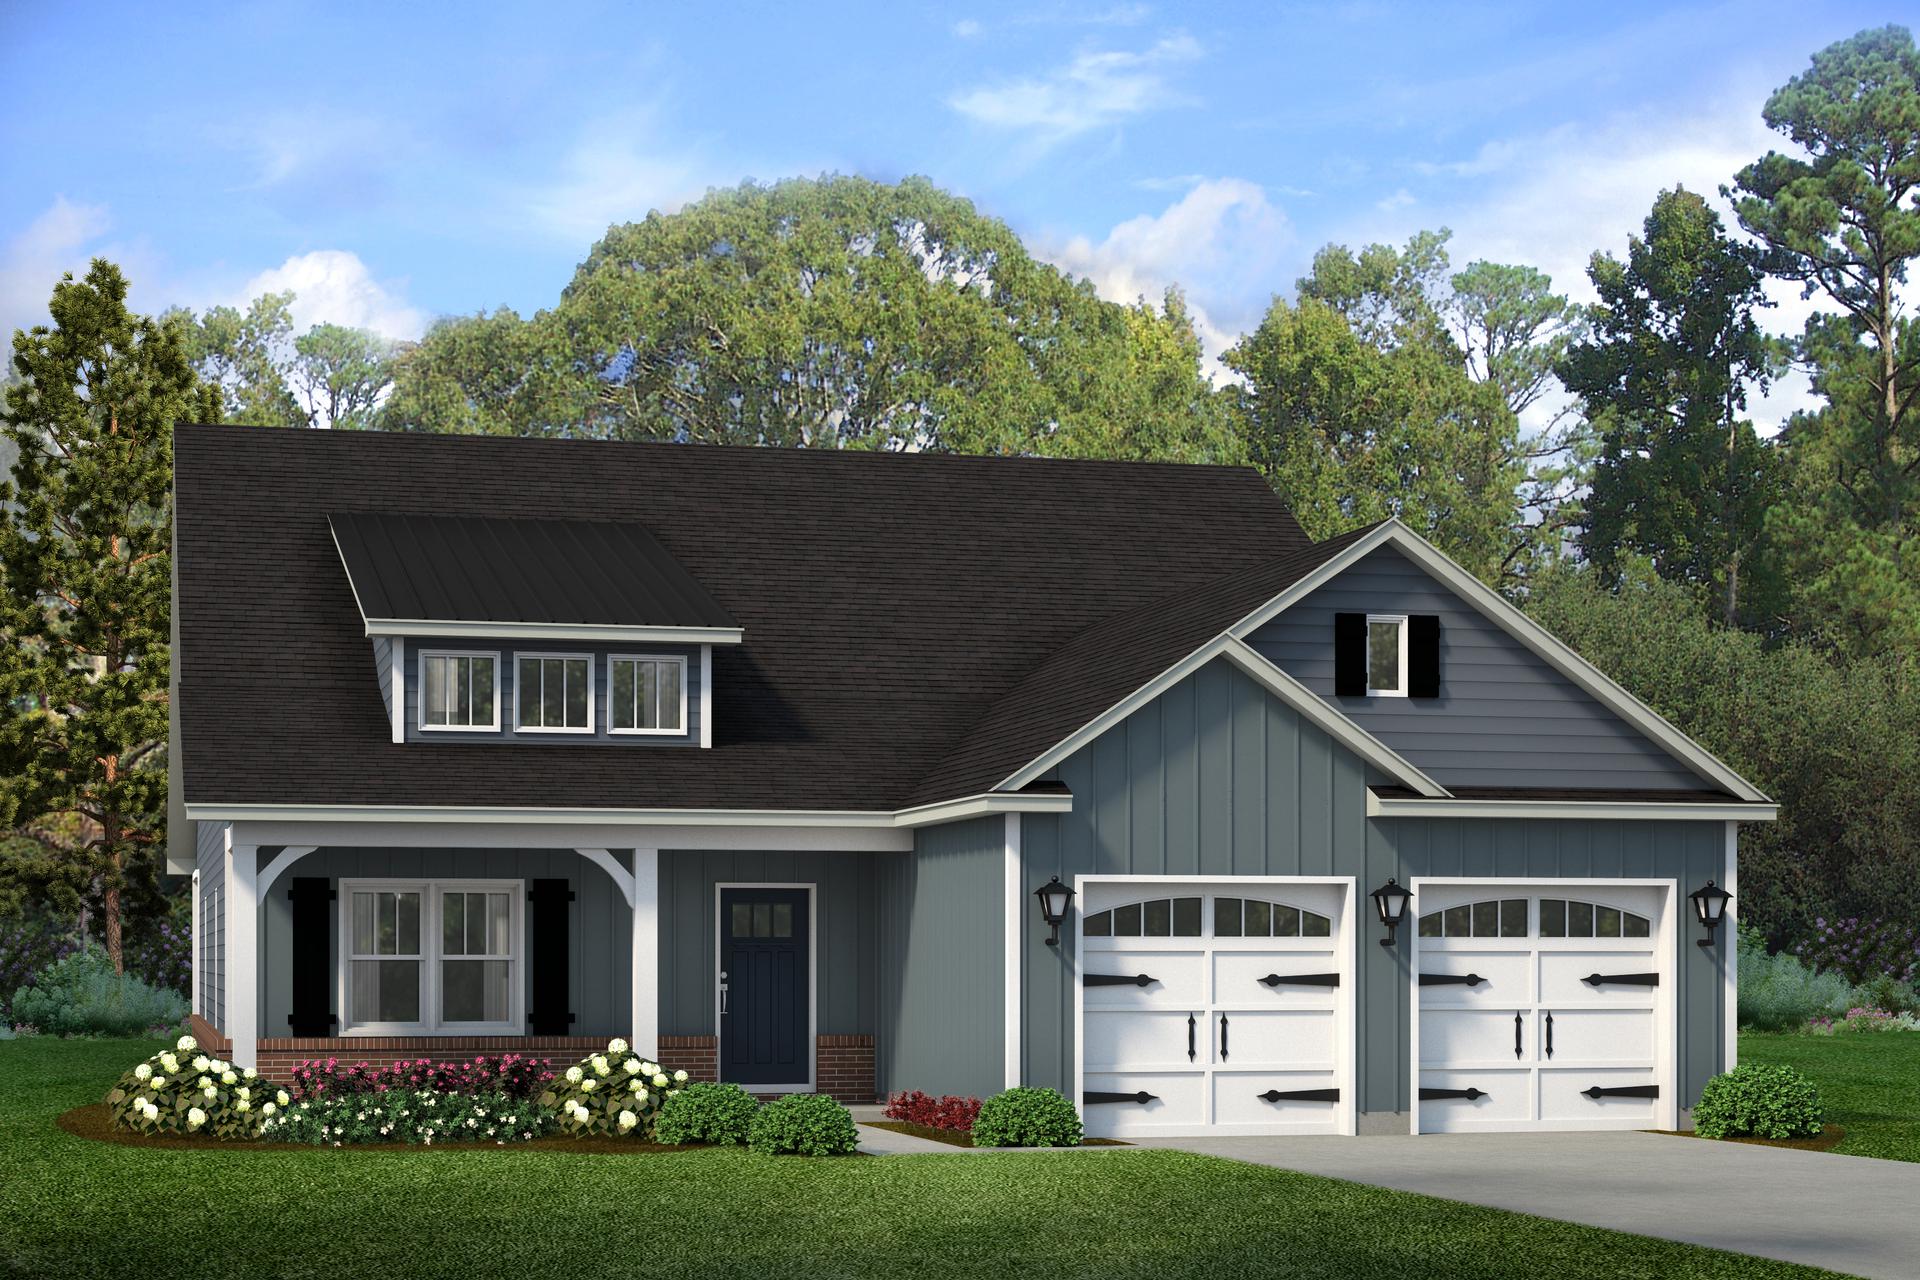 Elevation G. 3,137sf New Home in New Market, AL